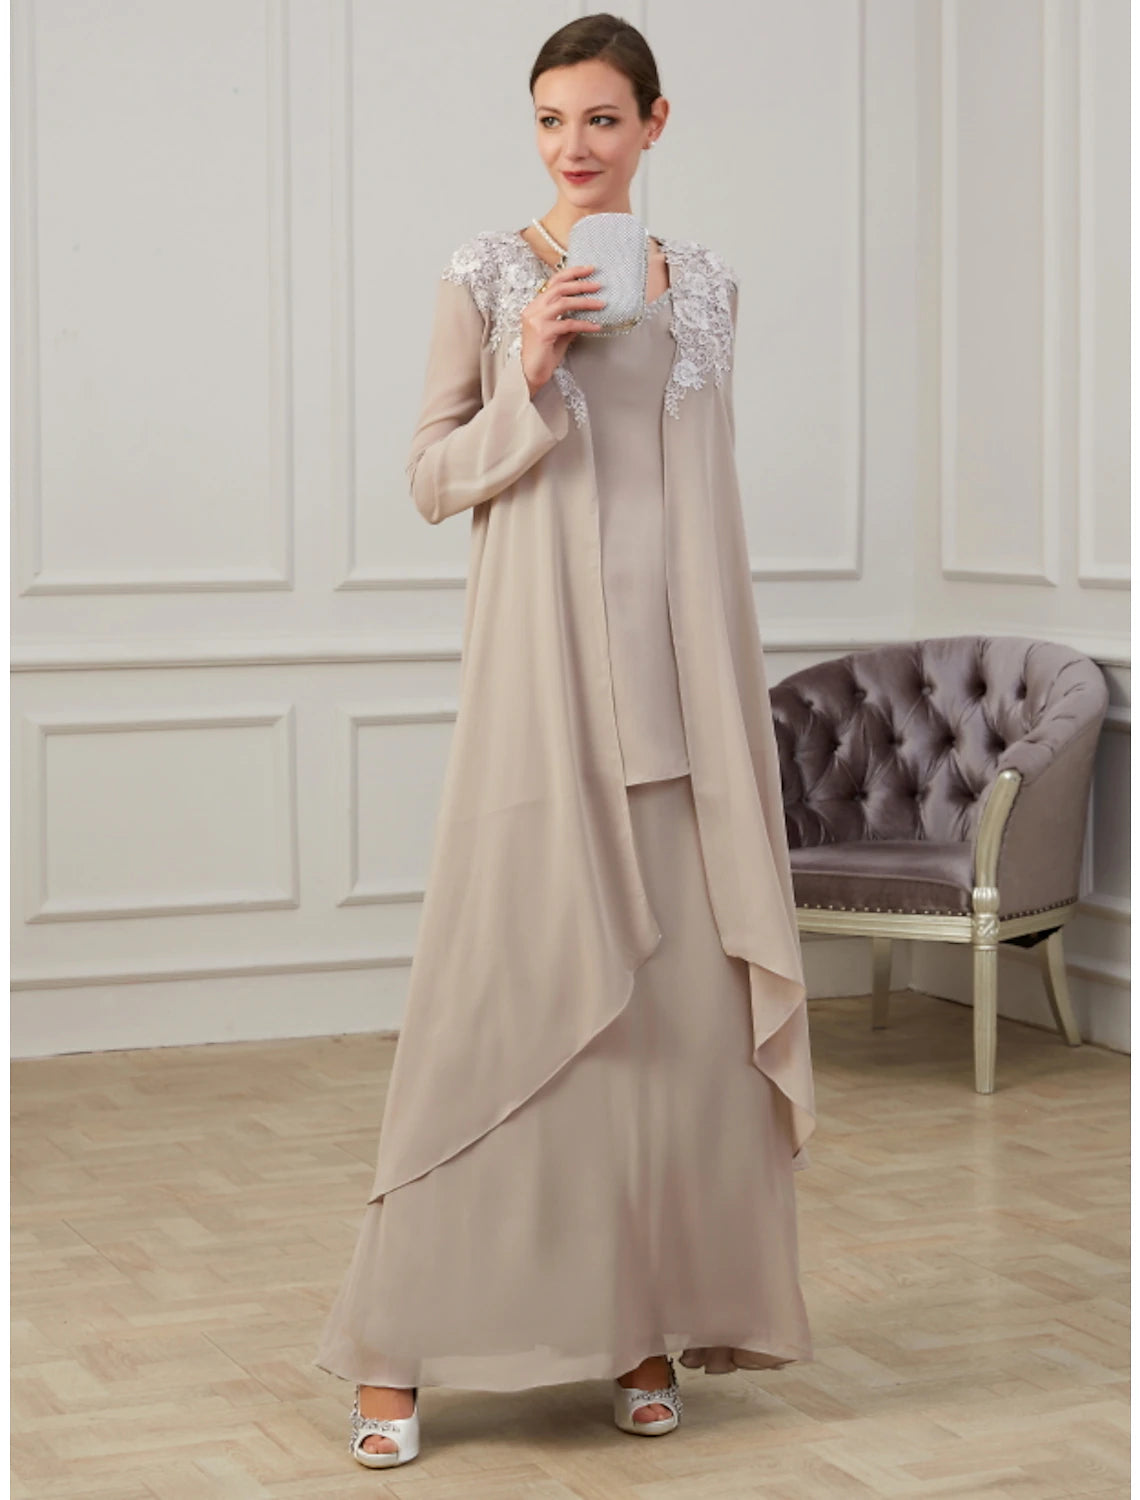 A-Line Mother of the Bride Dress Wedding Guest Elegant Jewel Neck Floor Length Chiffon Long Sleeve Jacket Dresses with Appliques Fall